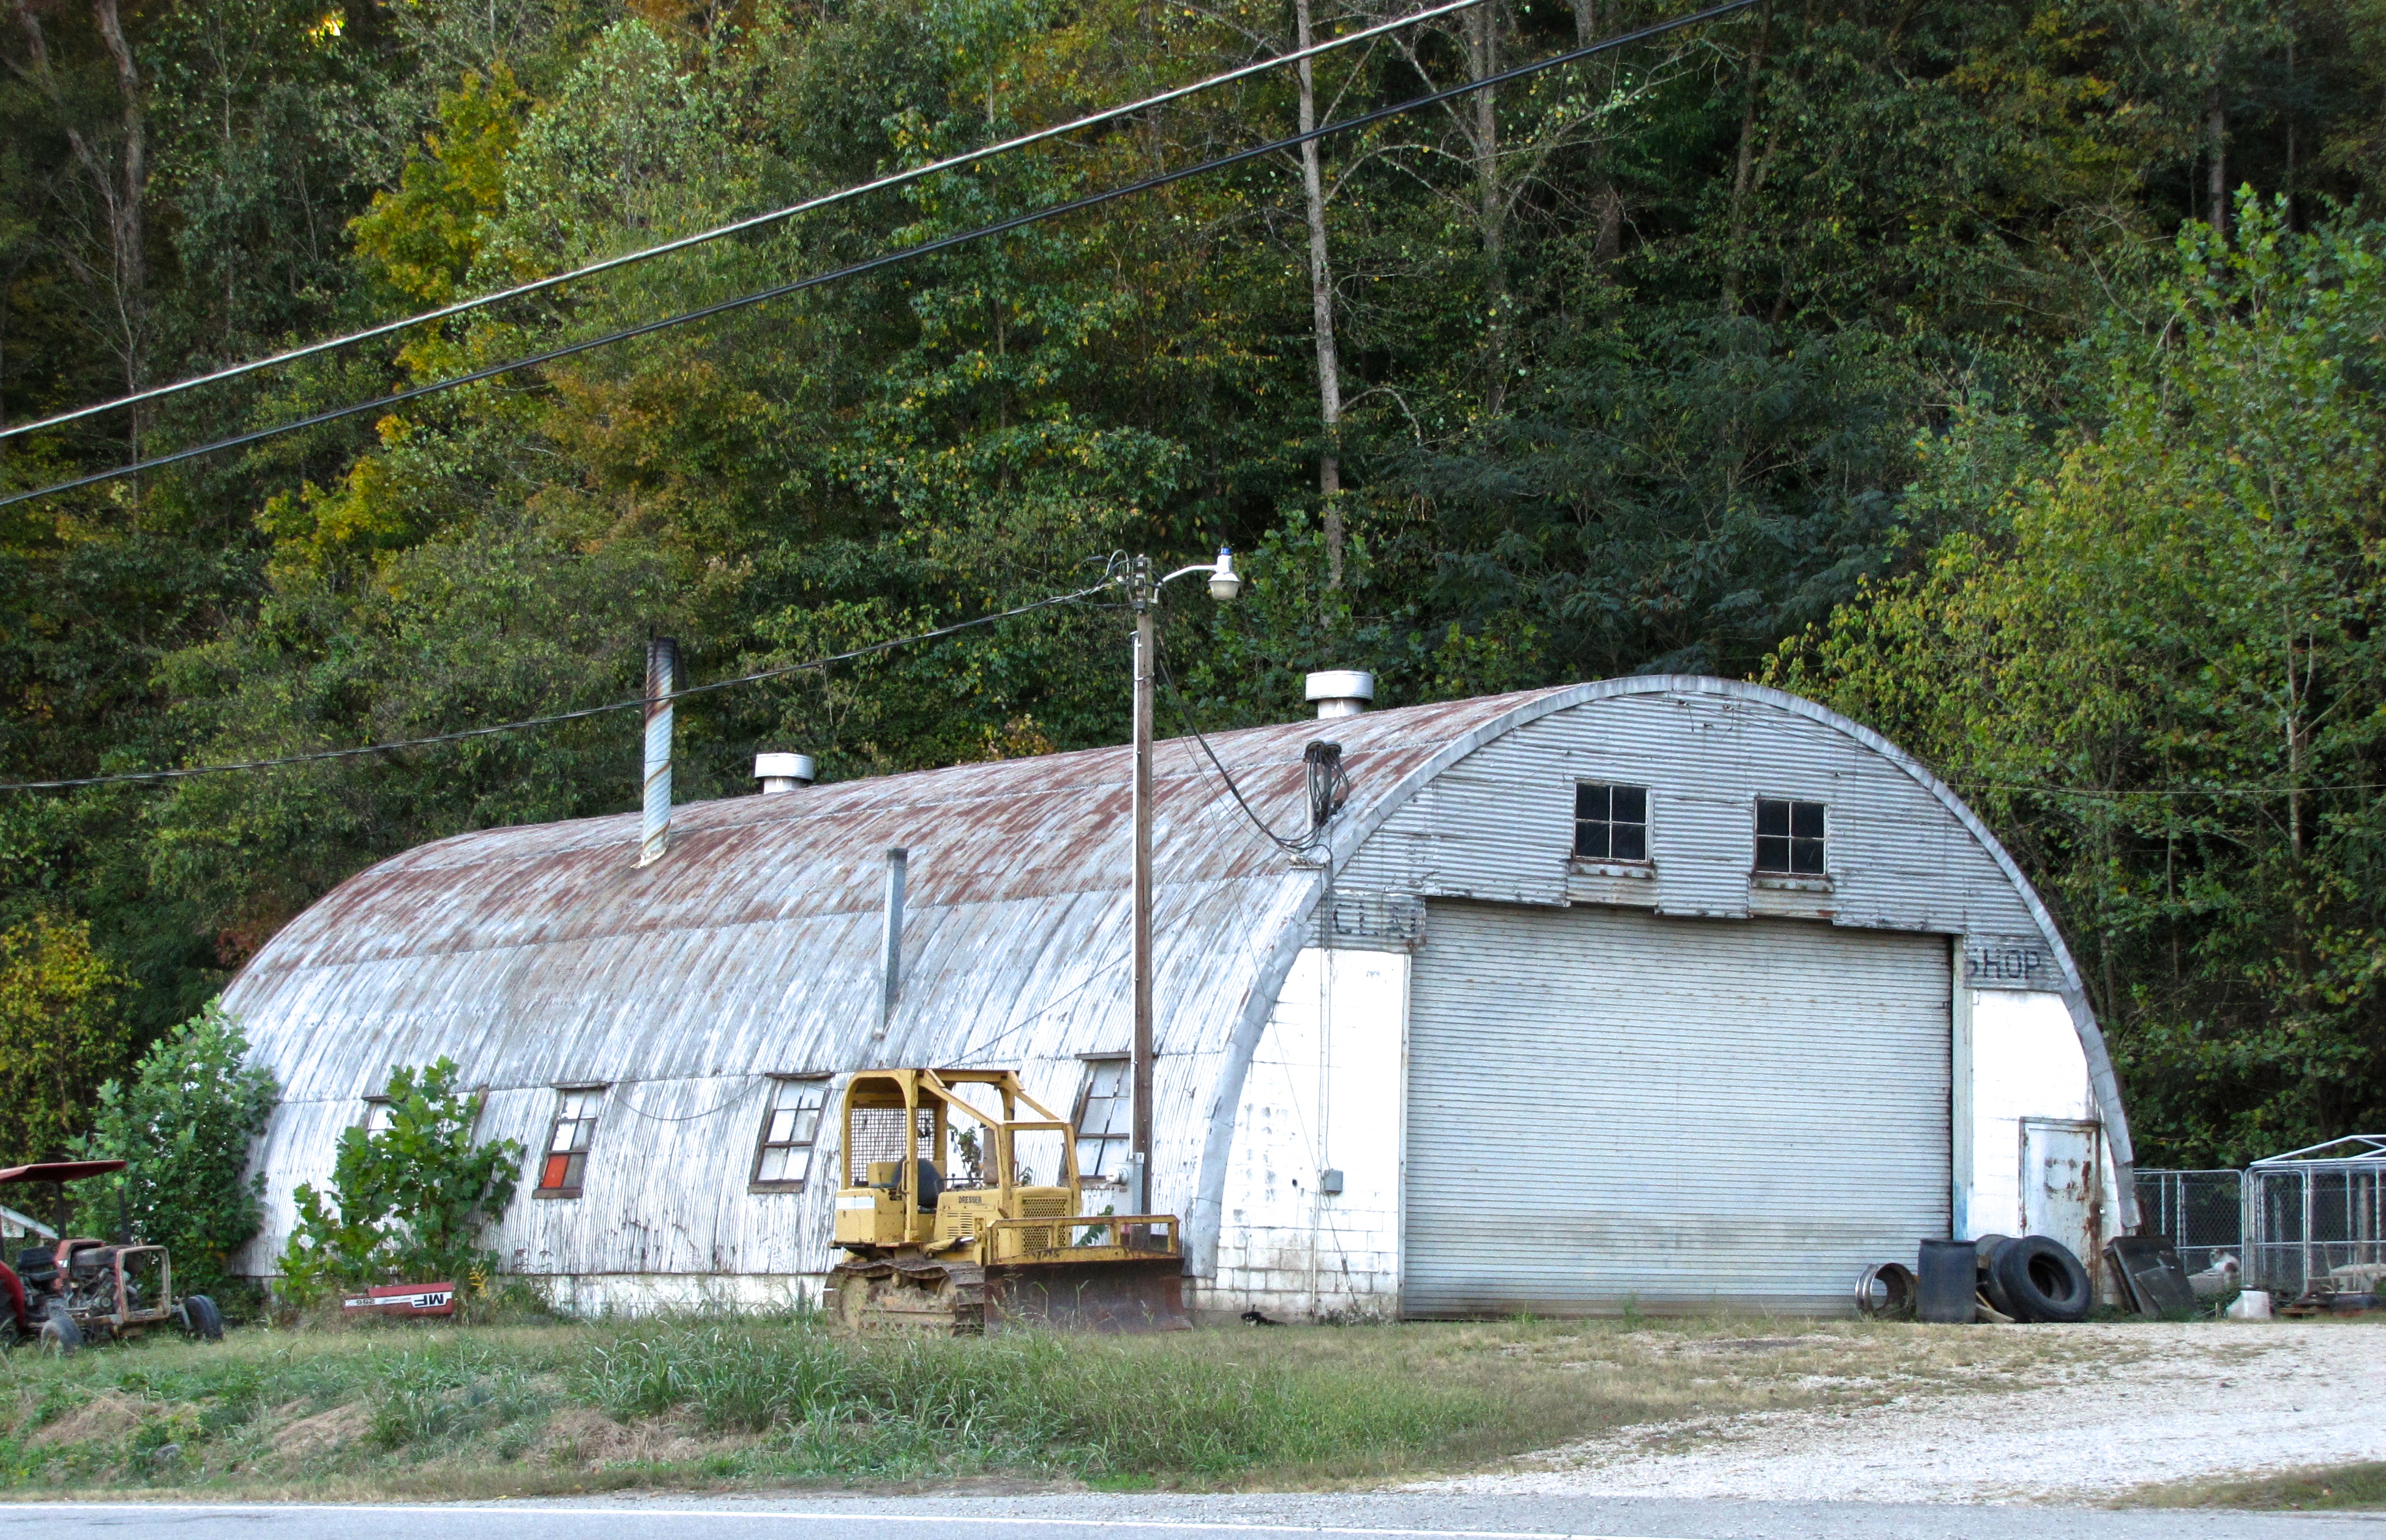 quonset hut in Clive, IA